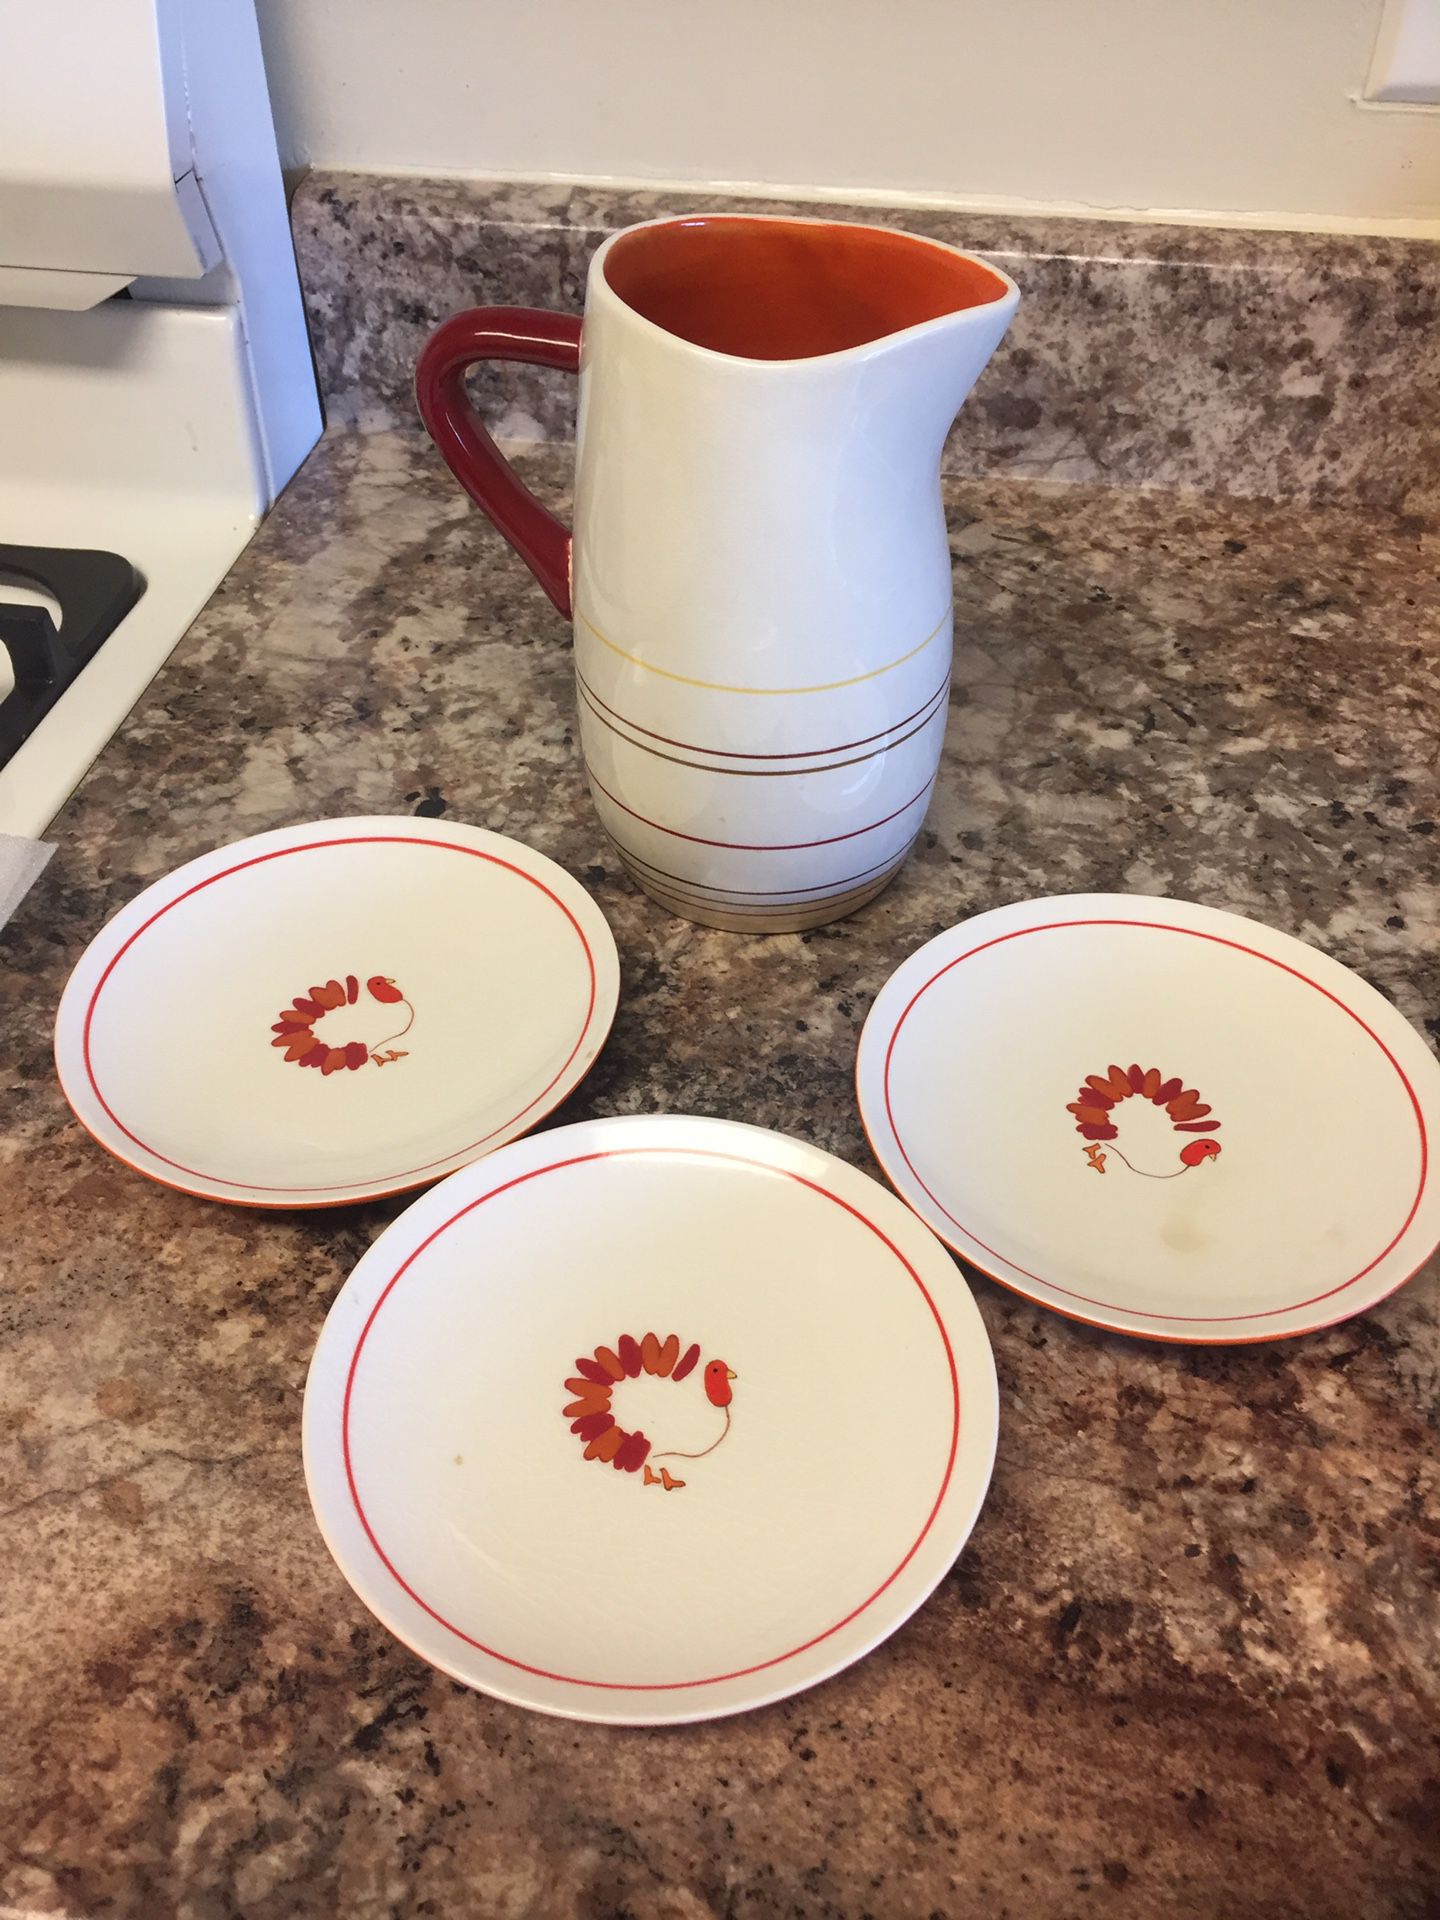 Cute thanksgiving ceramic plates and pitcher